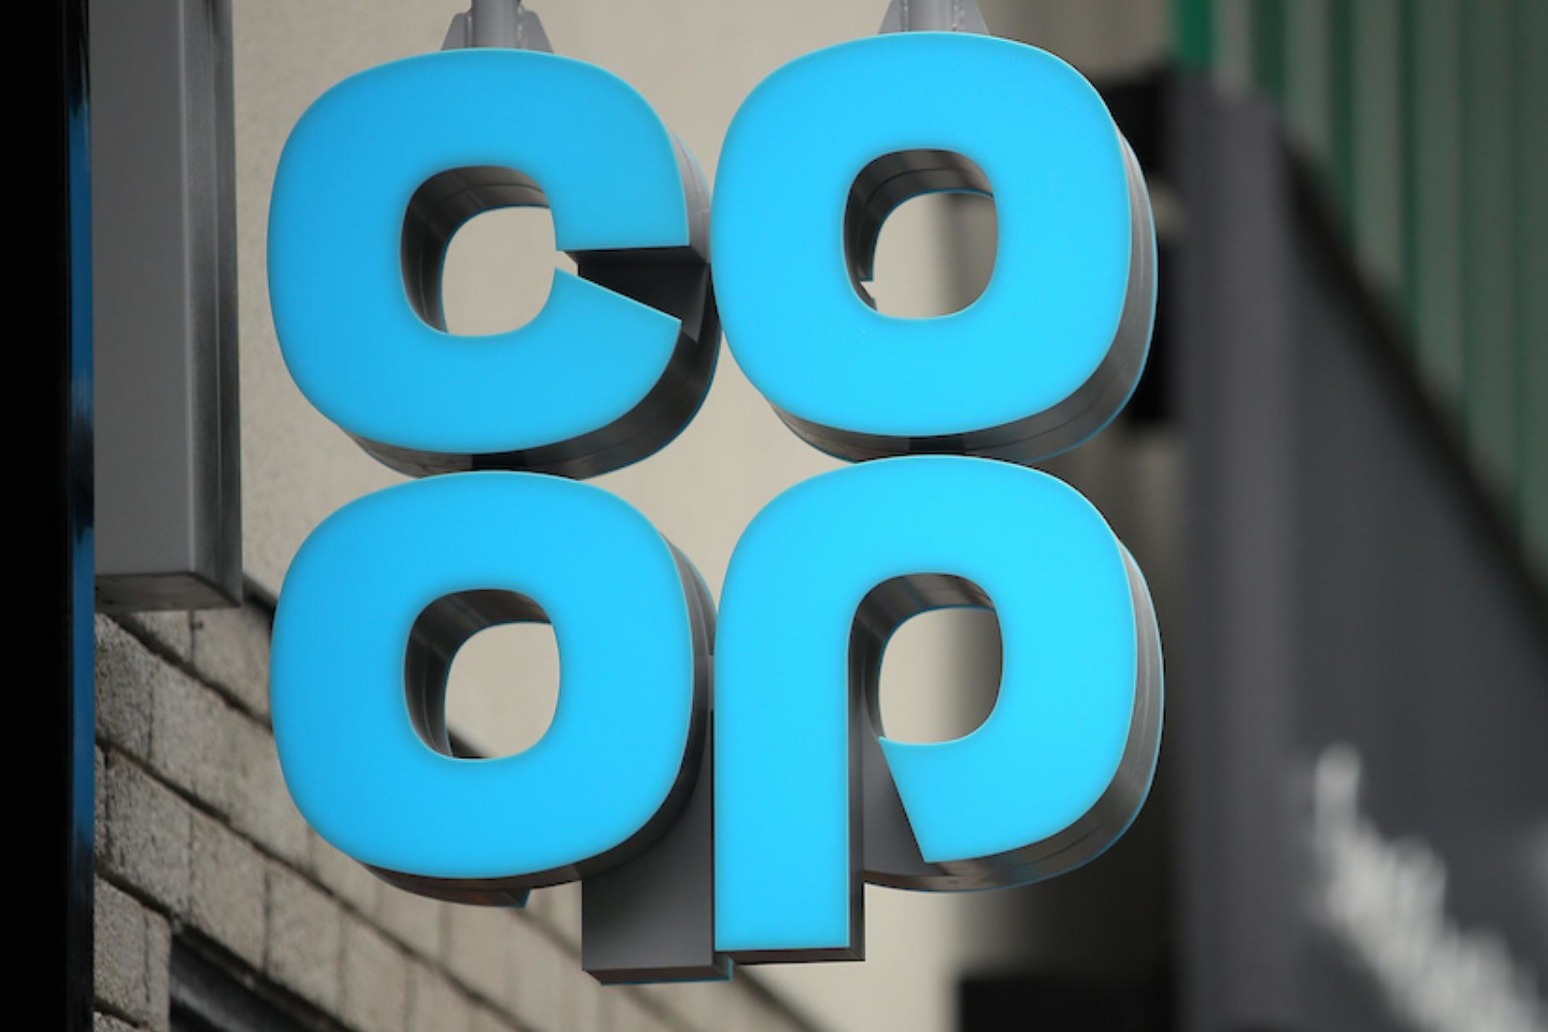 Union accuses Co-op of ‘Scrooge-like attitude’ as coffinmaker dispute continues 